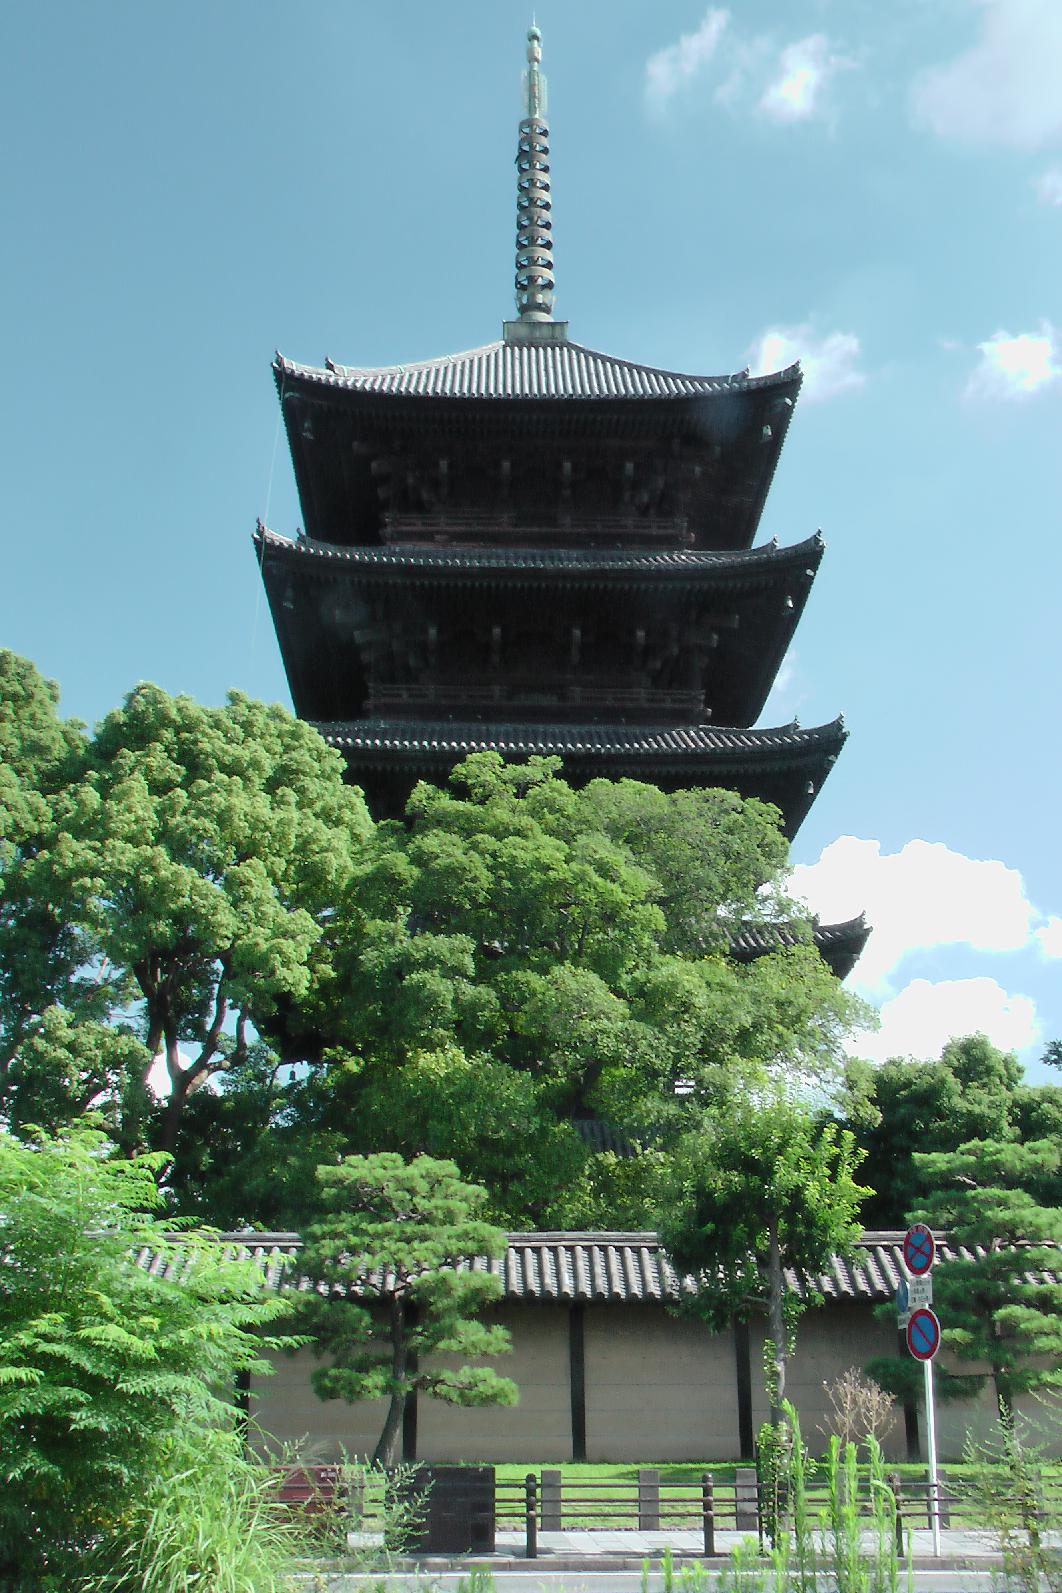 With a height of 57 metres (187 foot) this five storied pagoda is Japan's highest.